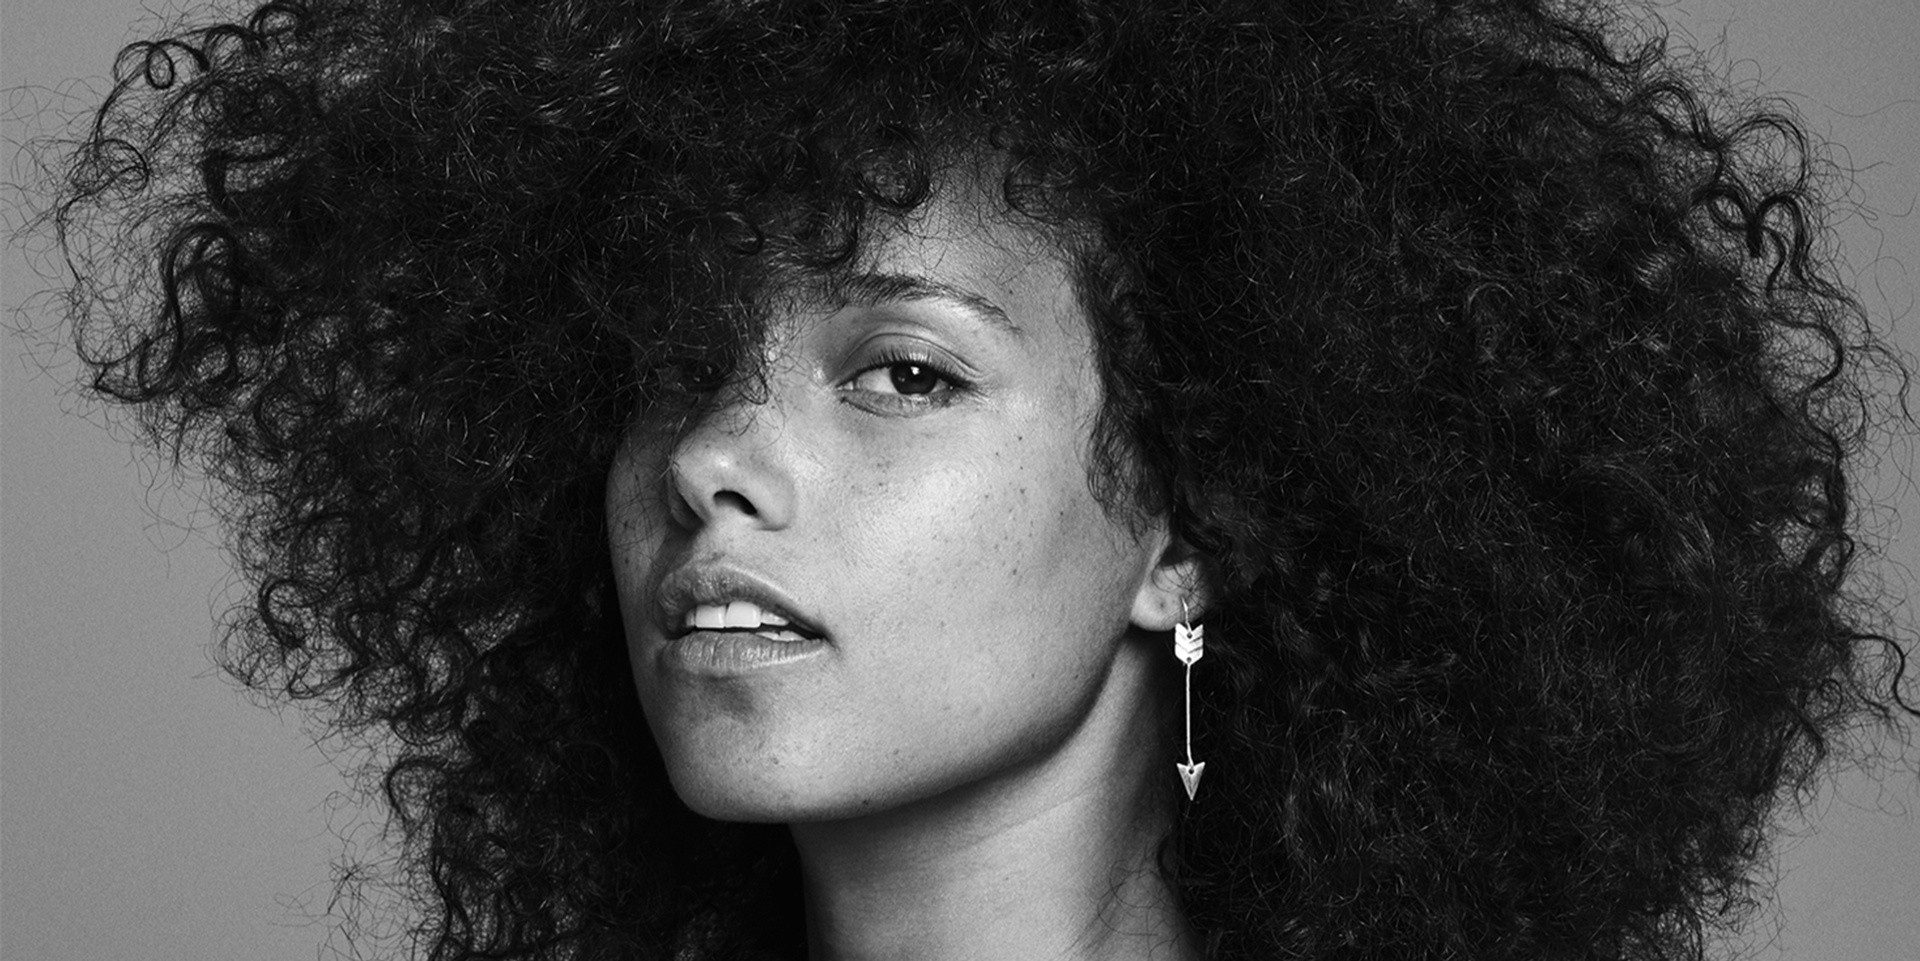 Alicia Keys to headline New Year's Eve concert in Singapore